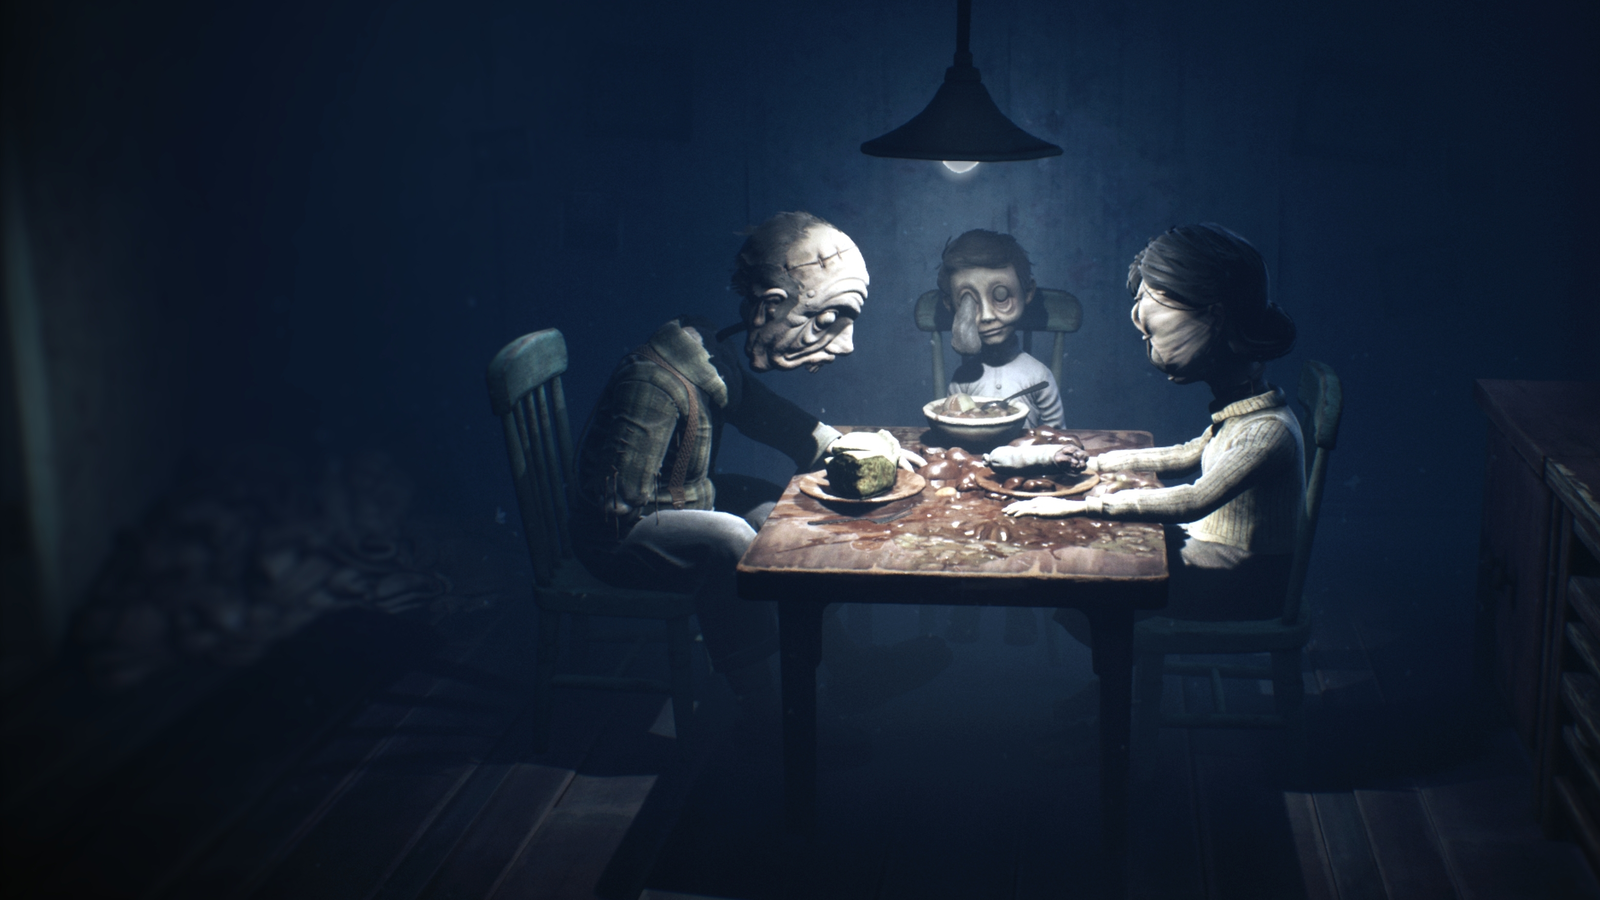 Little Nightmares II: A Game of Suspense and Intricacy – The Falconer